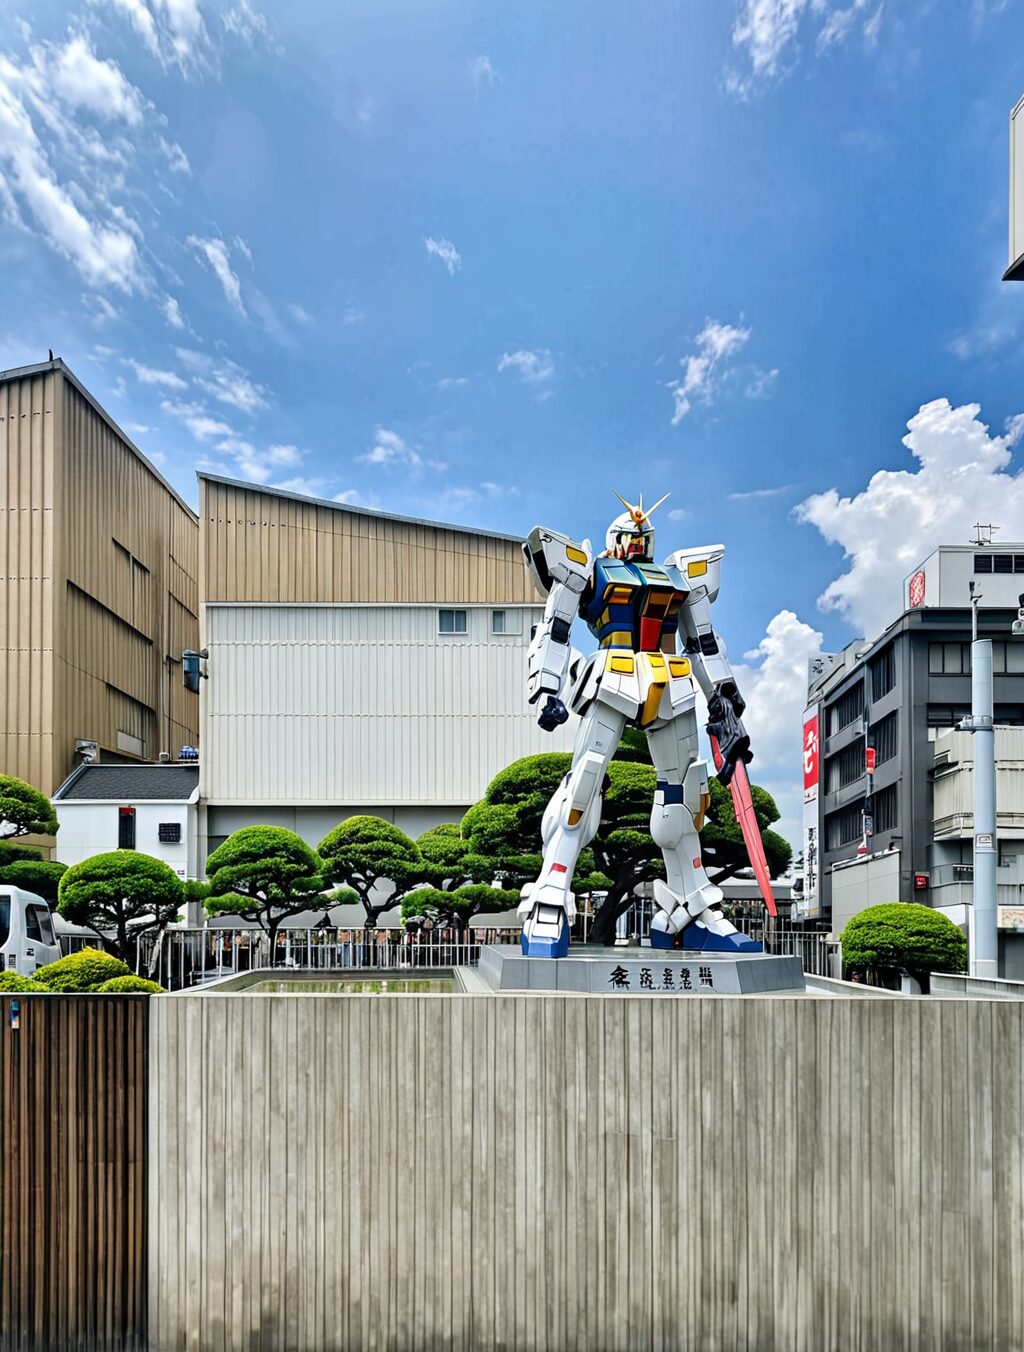 where is the gundam statue in japan